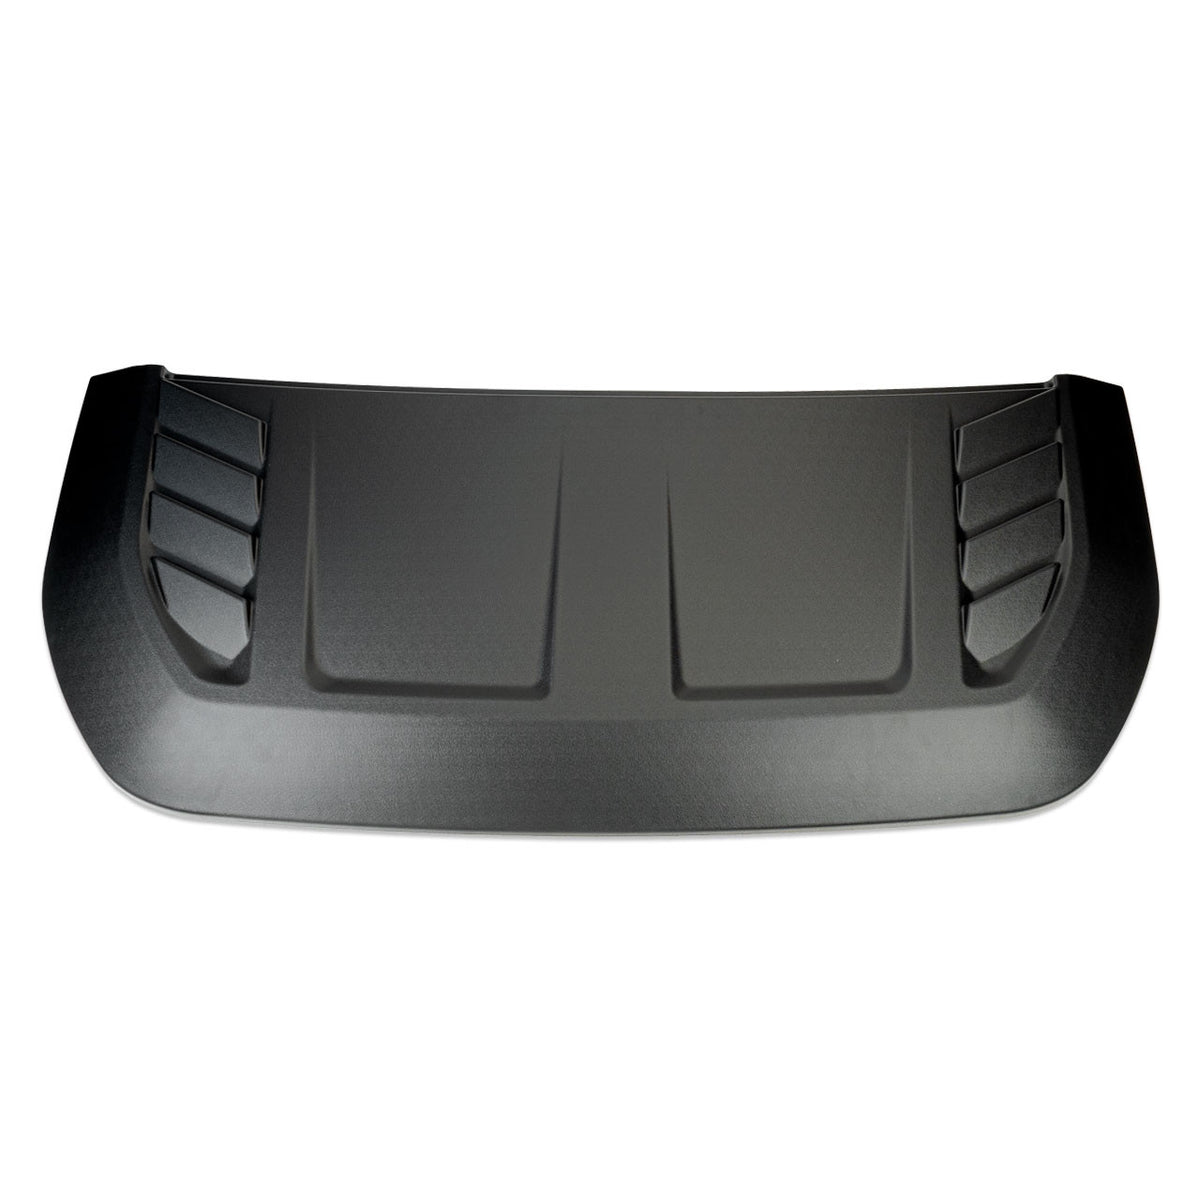 IAG I-Line Non-Functional Hood Scoop for 2021+ Ford Bronco